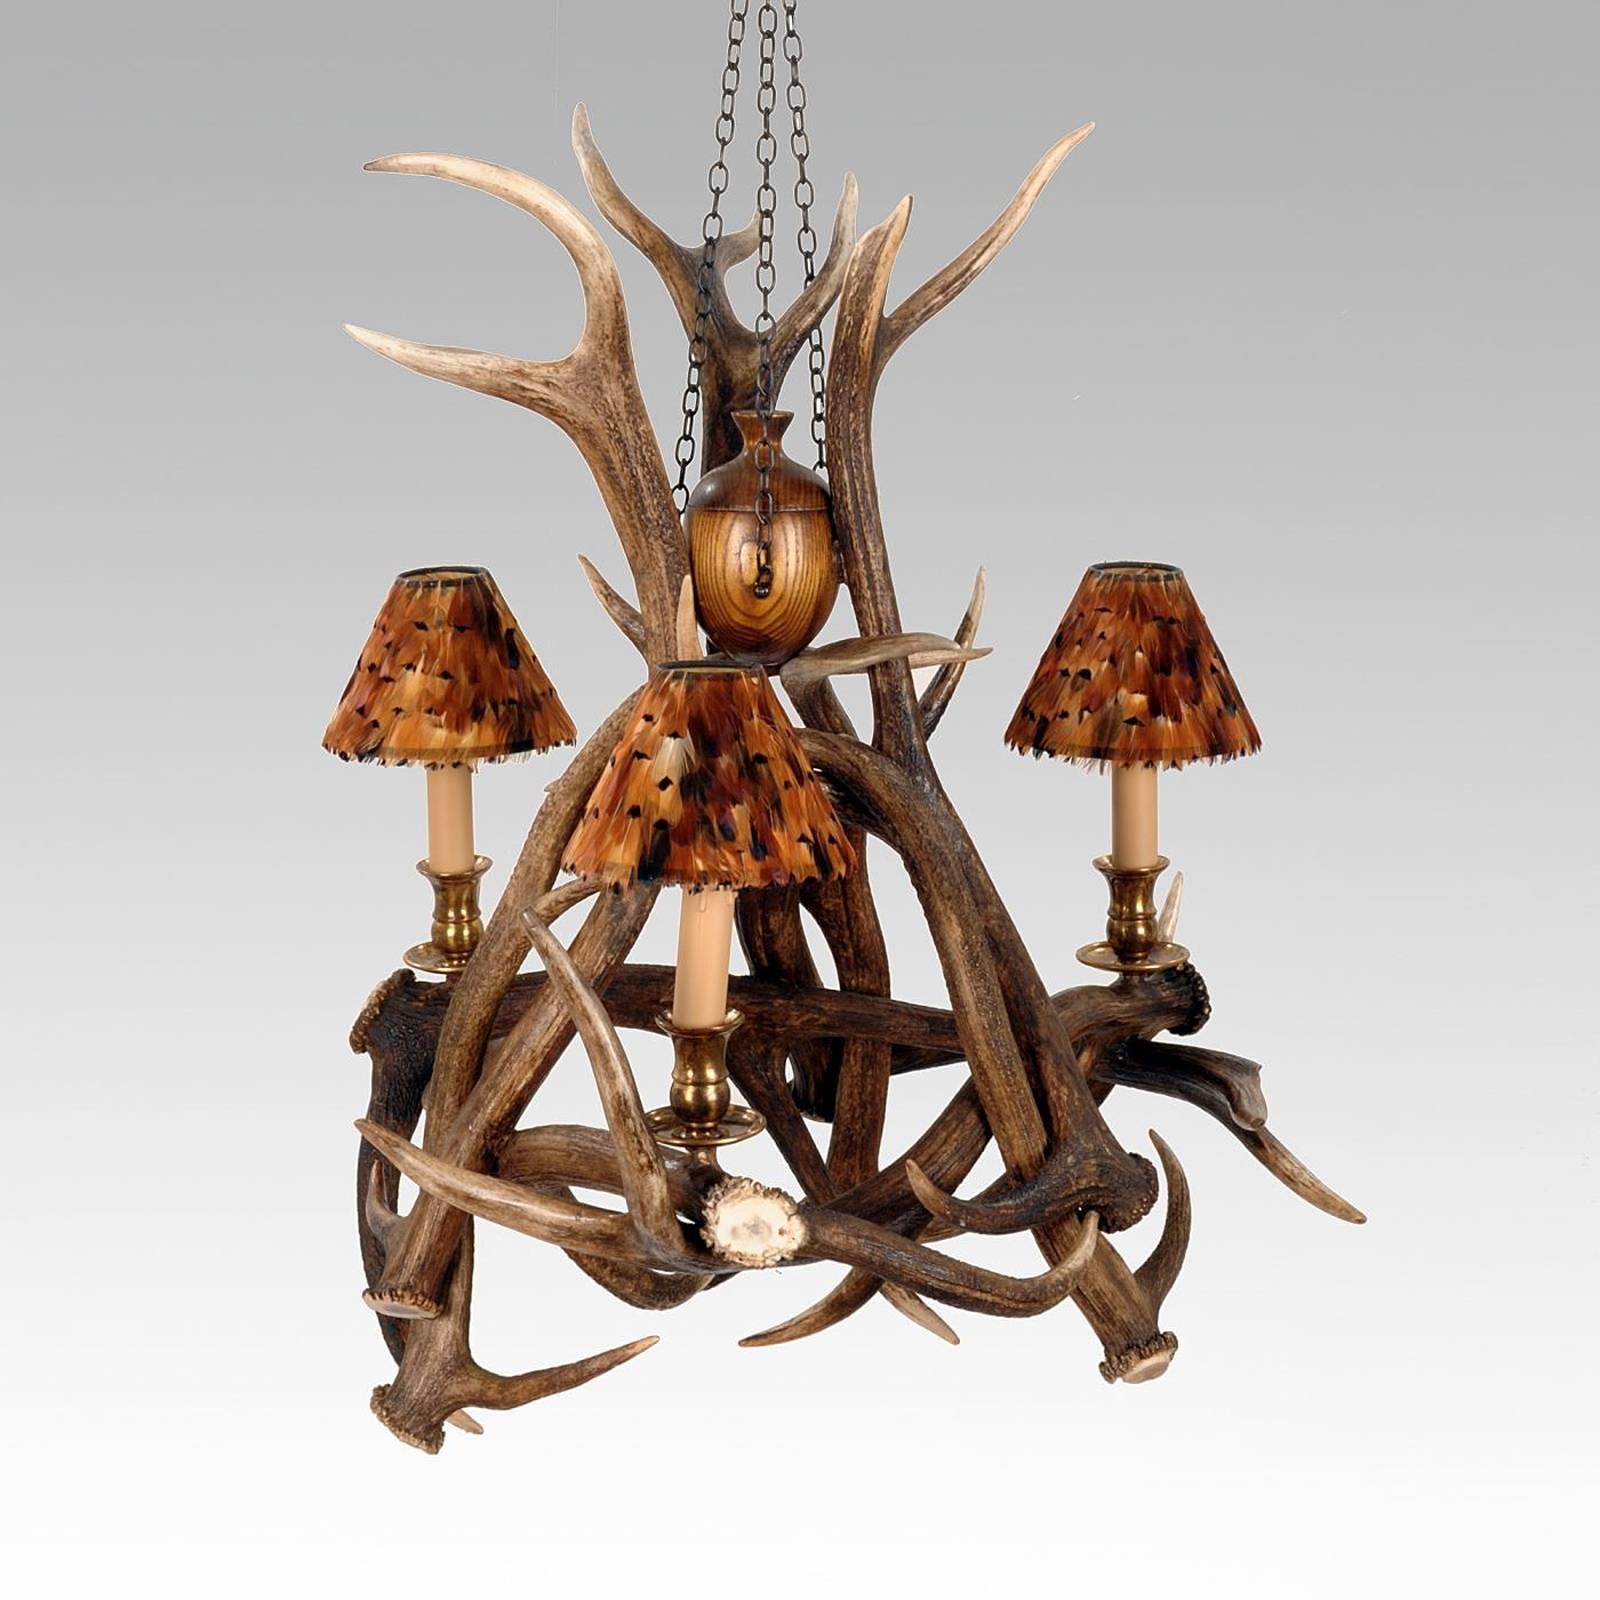 Chandelier three antlers with three deer antlers. 
Vintage brass finish, three bulbs and three partridge 
feather lamp shades.
